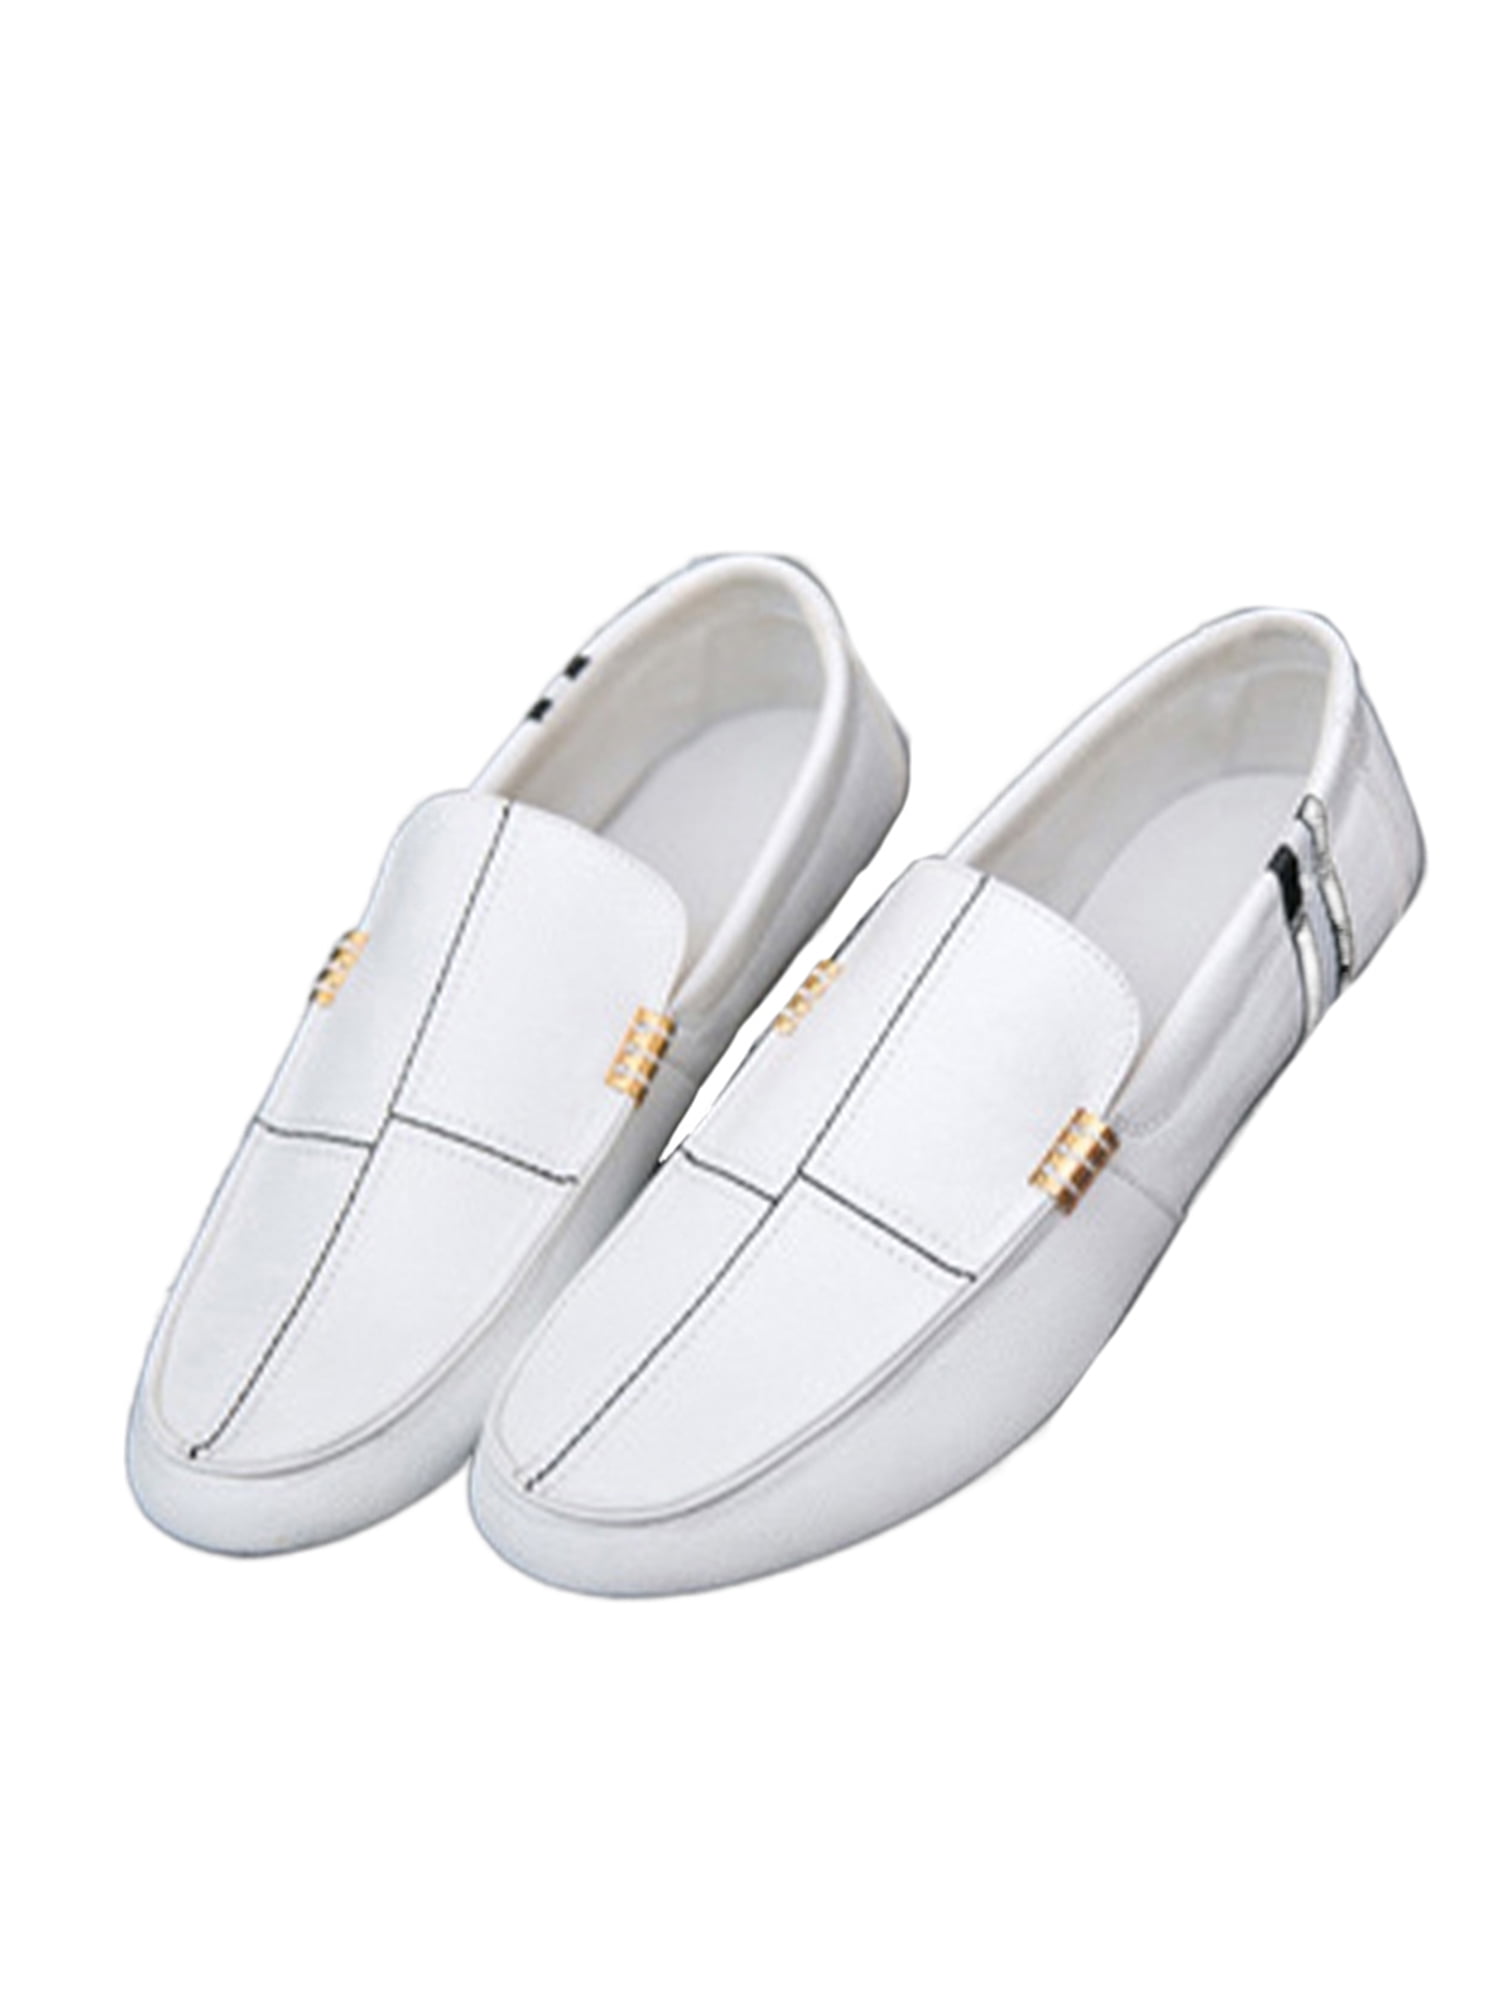 Shoes Moccasins L.Lambertazzi Moccasins white-black casual look 